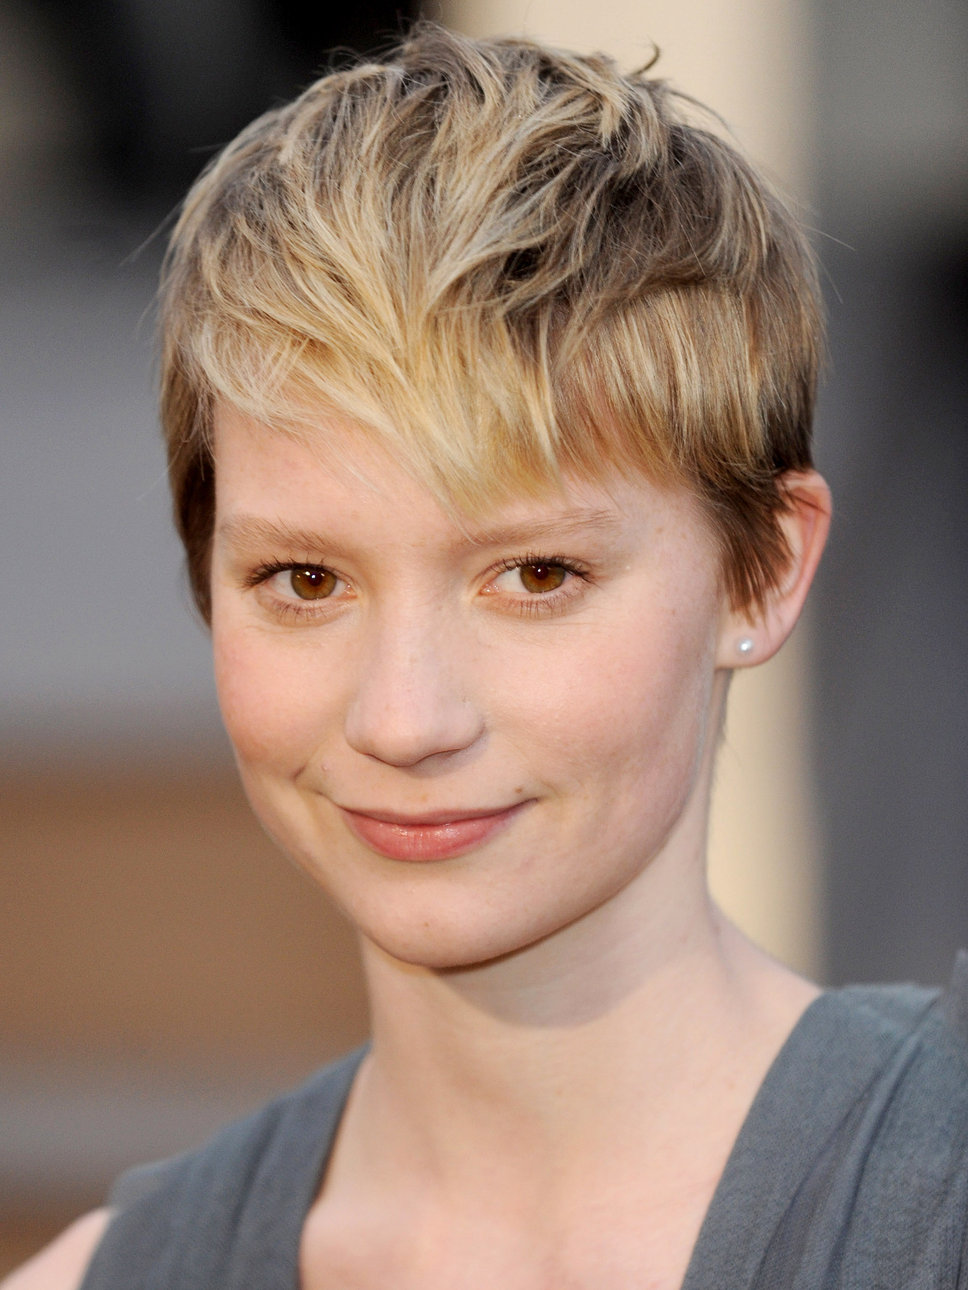 Messy Hairstyles Short Pixie Haircut